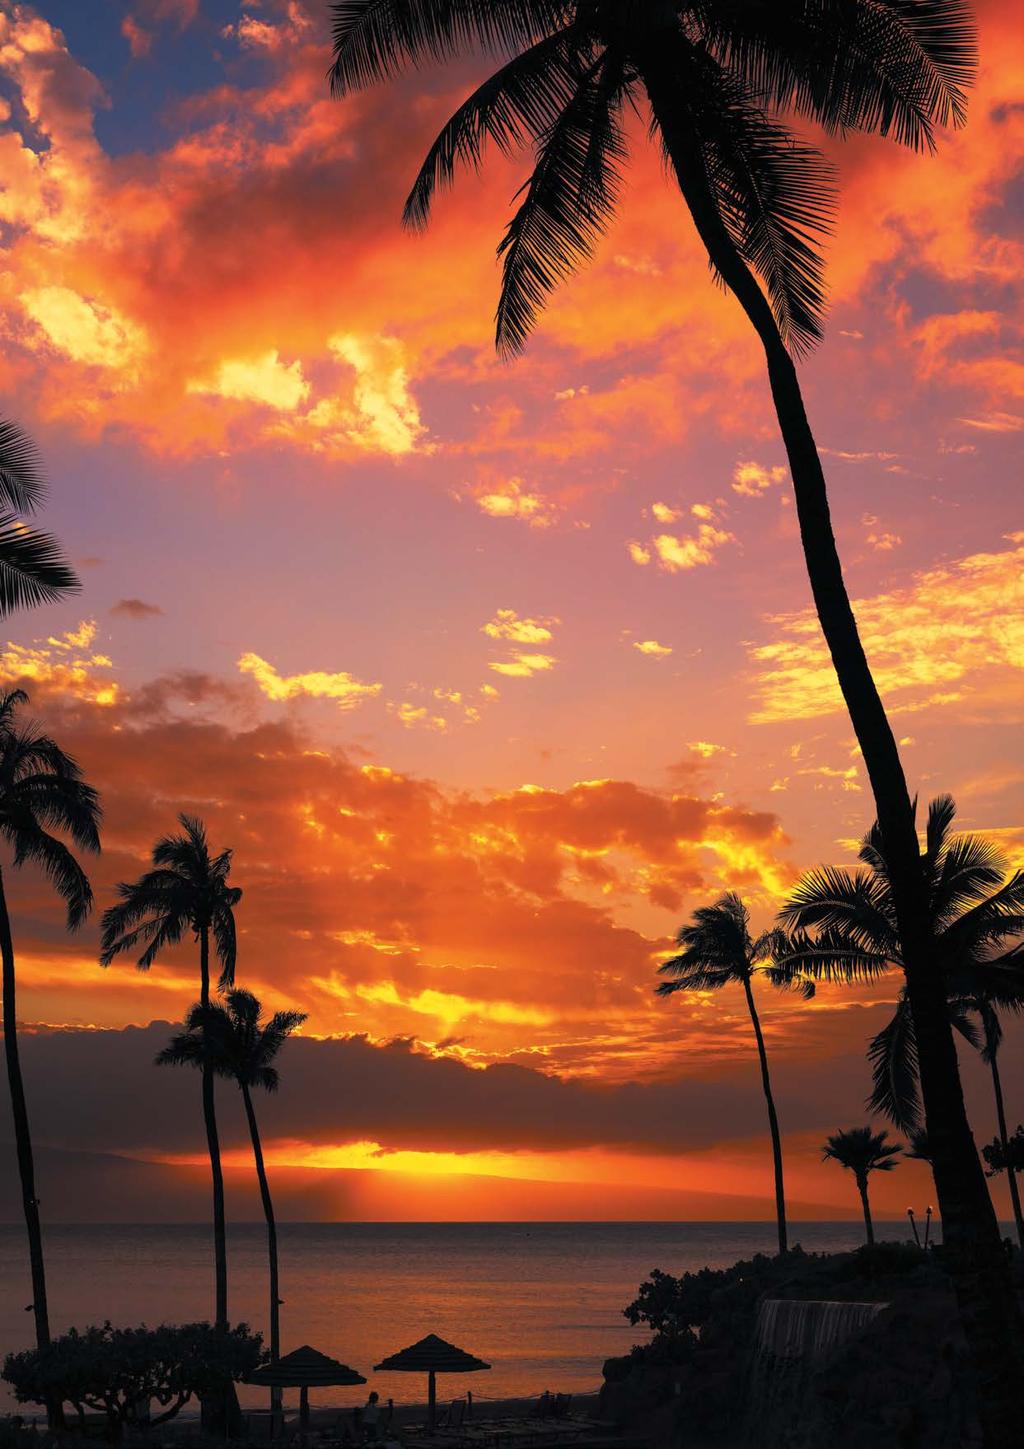 Maui Maui is known for its pristine beaches, lush rainforests, spectacular volcanic craters and charming historic